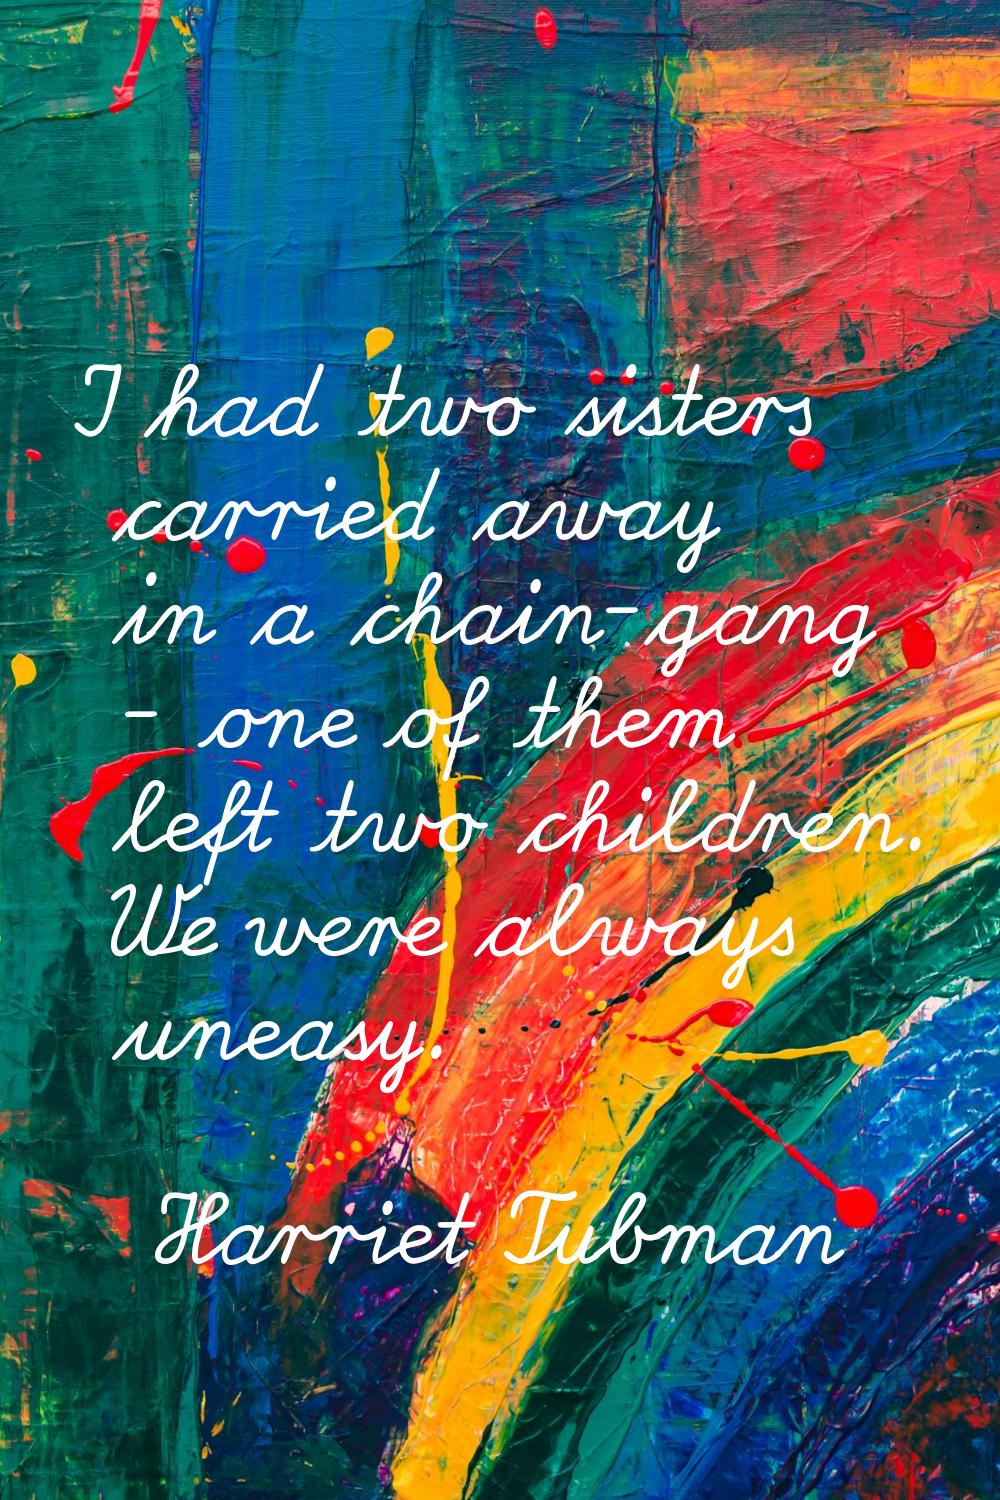 I had two sisters carried away in a chain-gang - one of them left two children. We were always unea